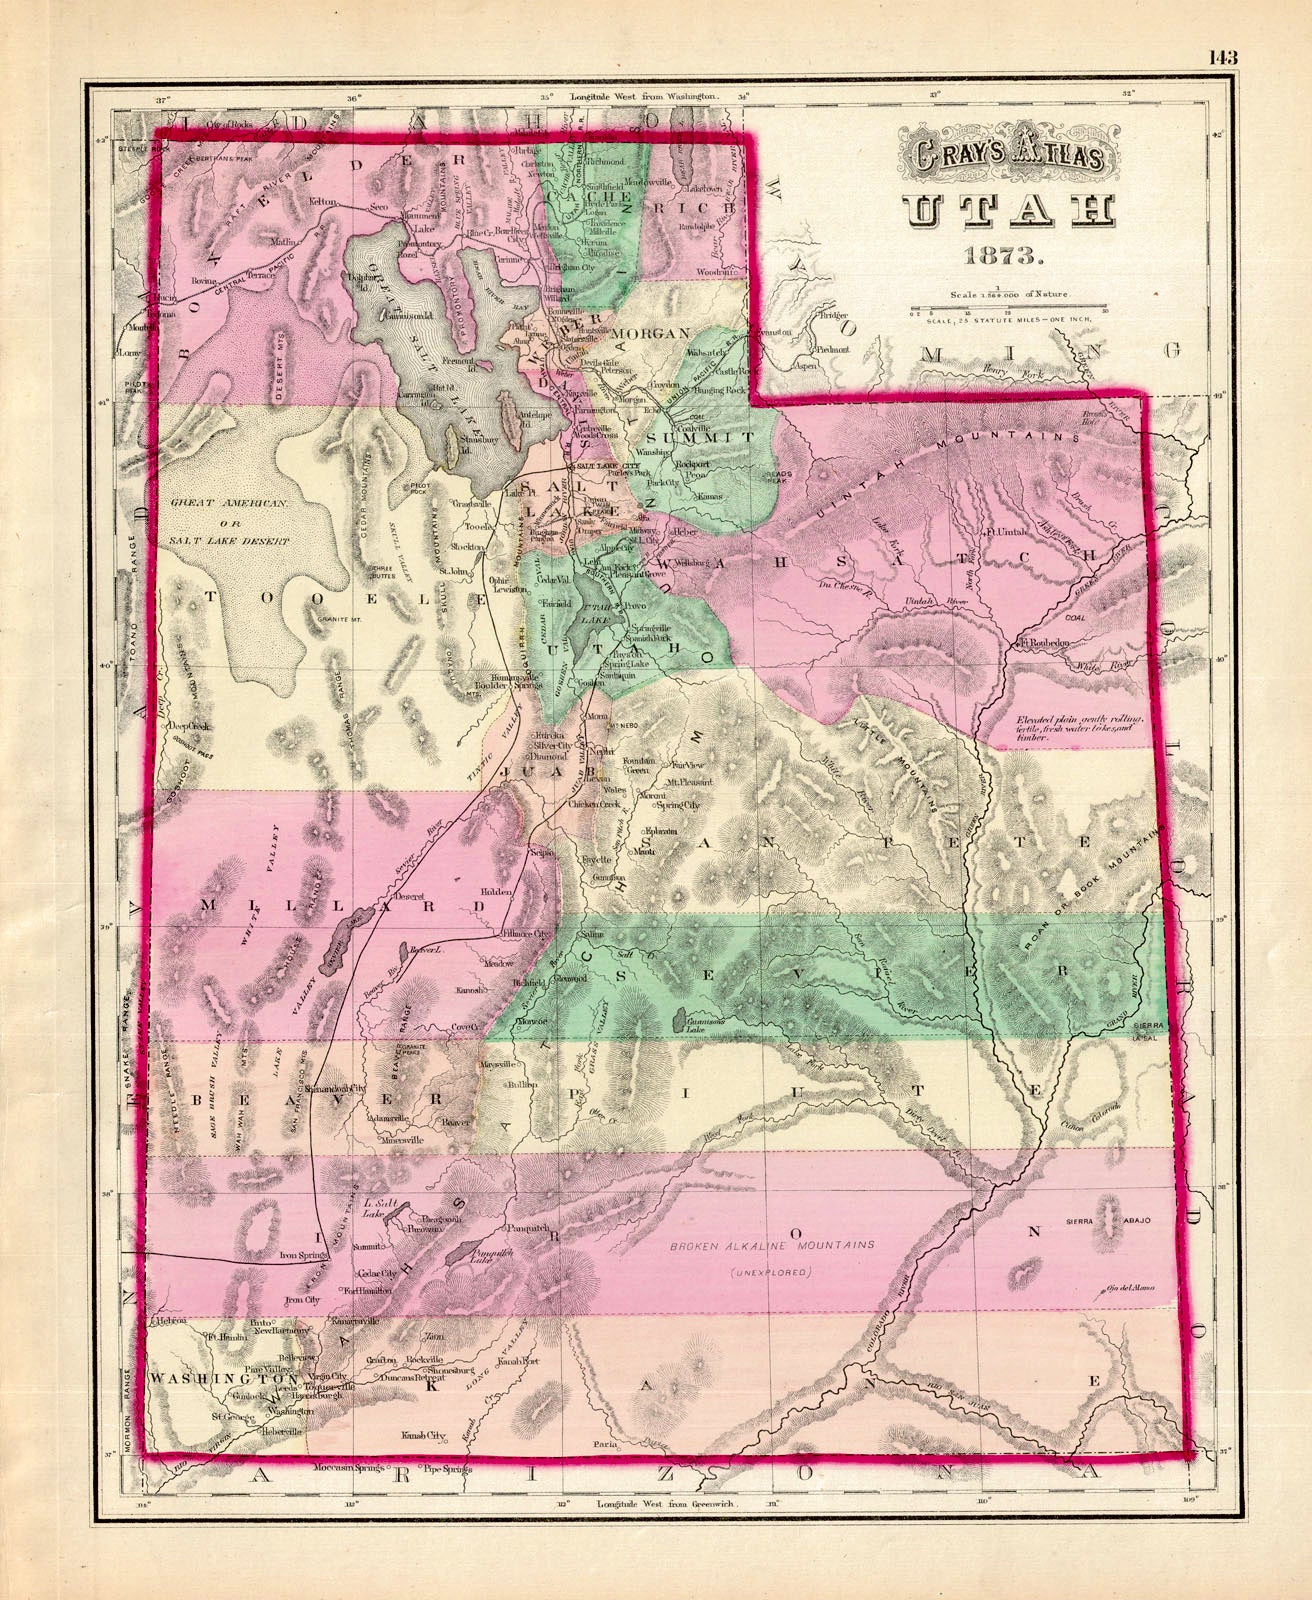 UTAH 1873. Gray, 1874 Bold original hand color distinguishes the counties which are mostly populated only from Bear Lake to Utah Lake. Notes the railroads progression. Honestly treats the southeastern portion of the state as "(Unexplored)". Condition is very good with minimal marginal soiling. Image size is approximately 15 x 12 (inches) 